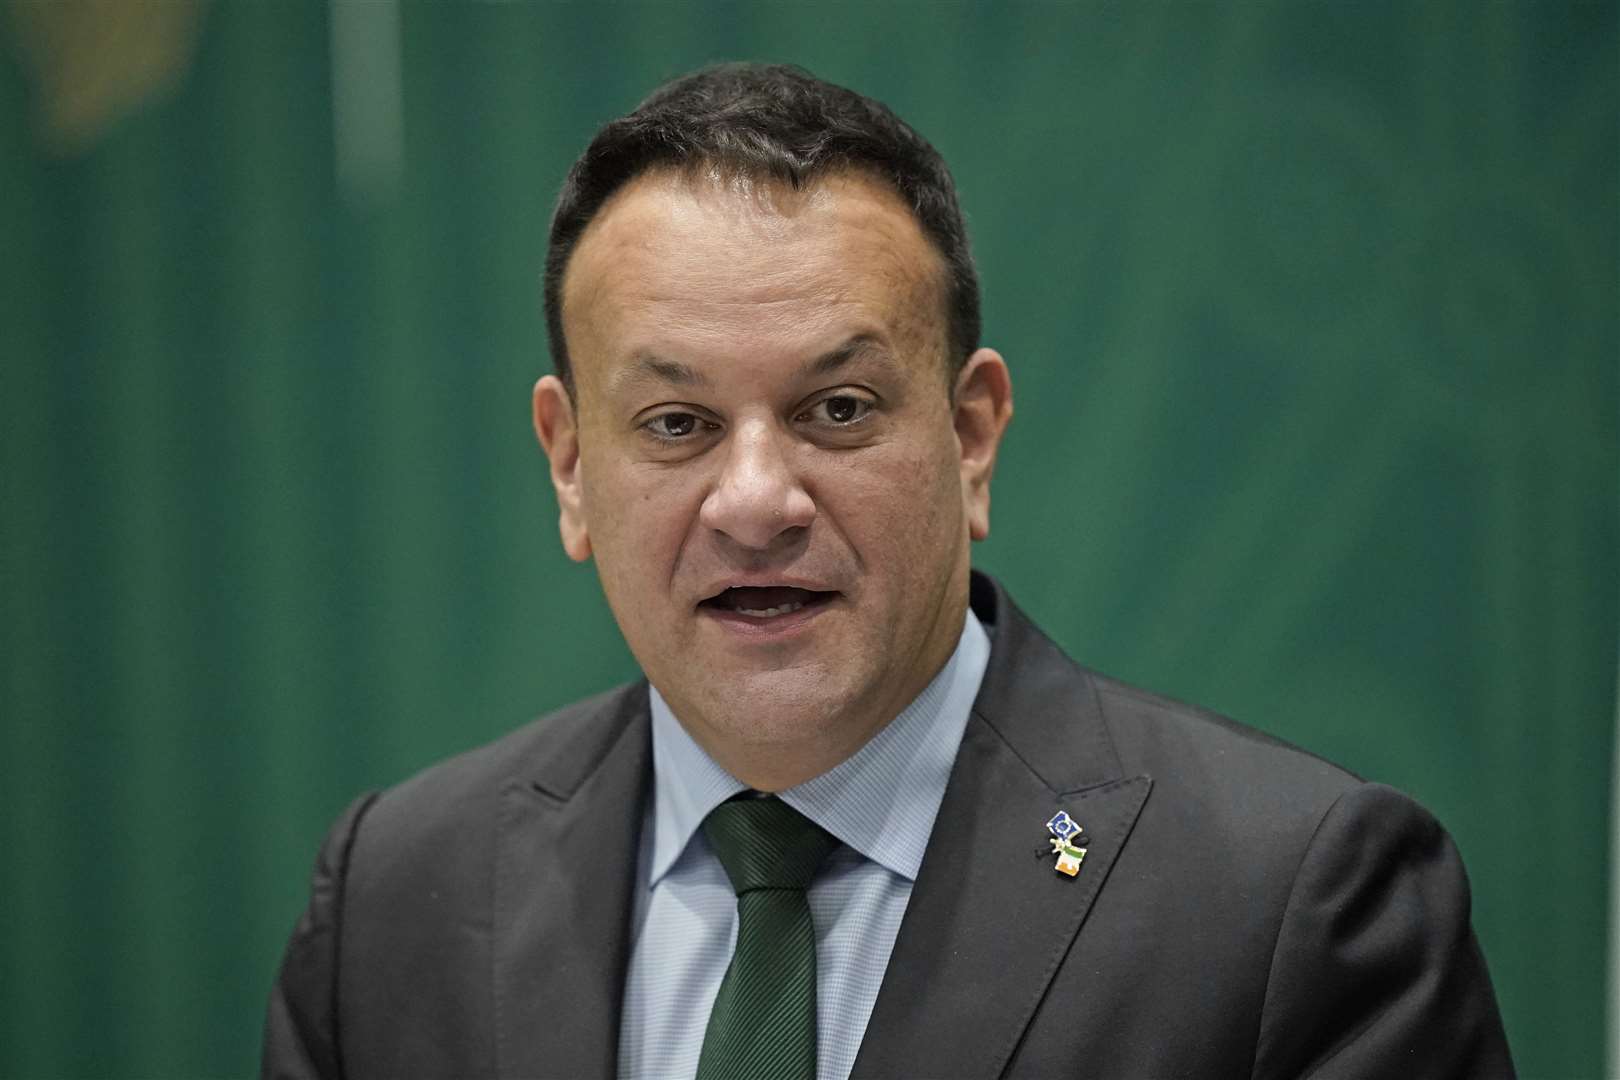 Taoiseach Leo Varadkar said he is ‘concerned about the level of misinformation’ around migration (Niall Carson/PA)